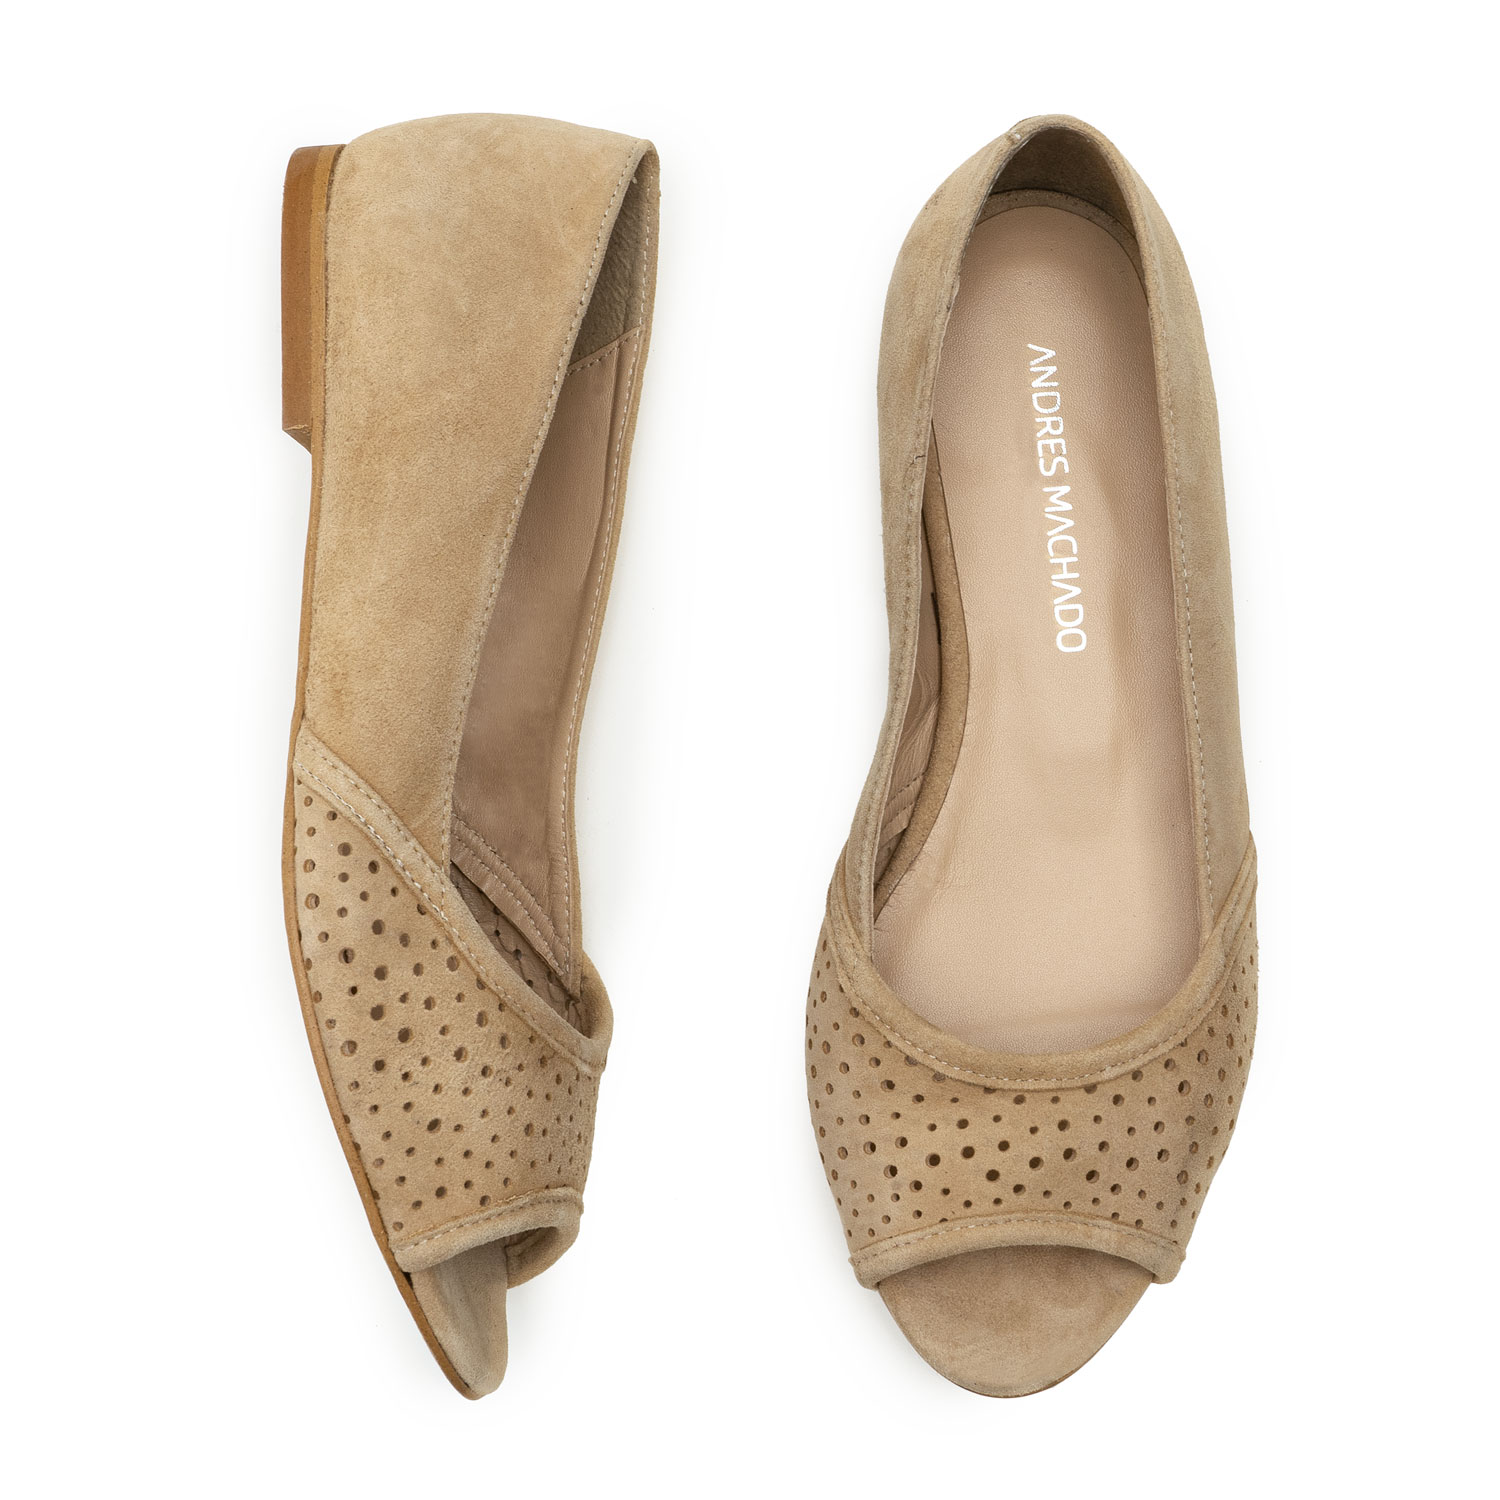 Open Toe Ballet Flats in Camel Suede Leather 